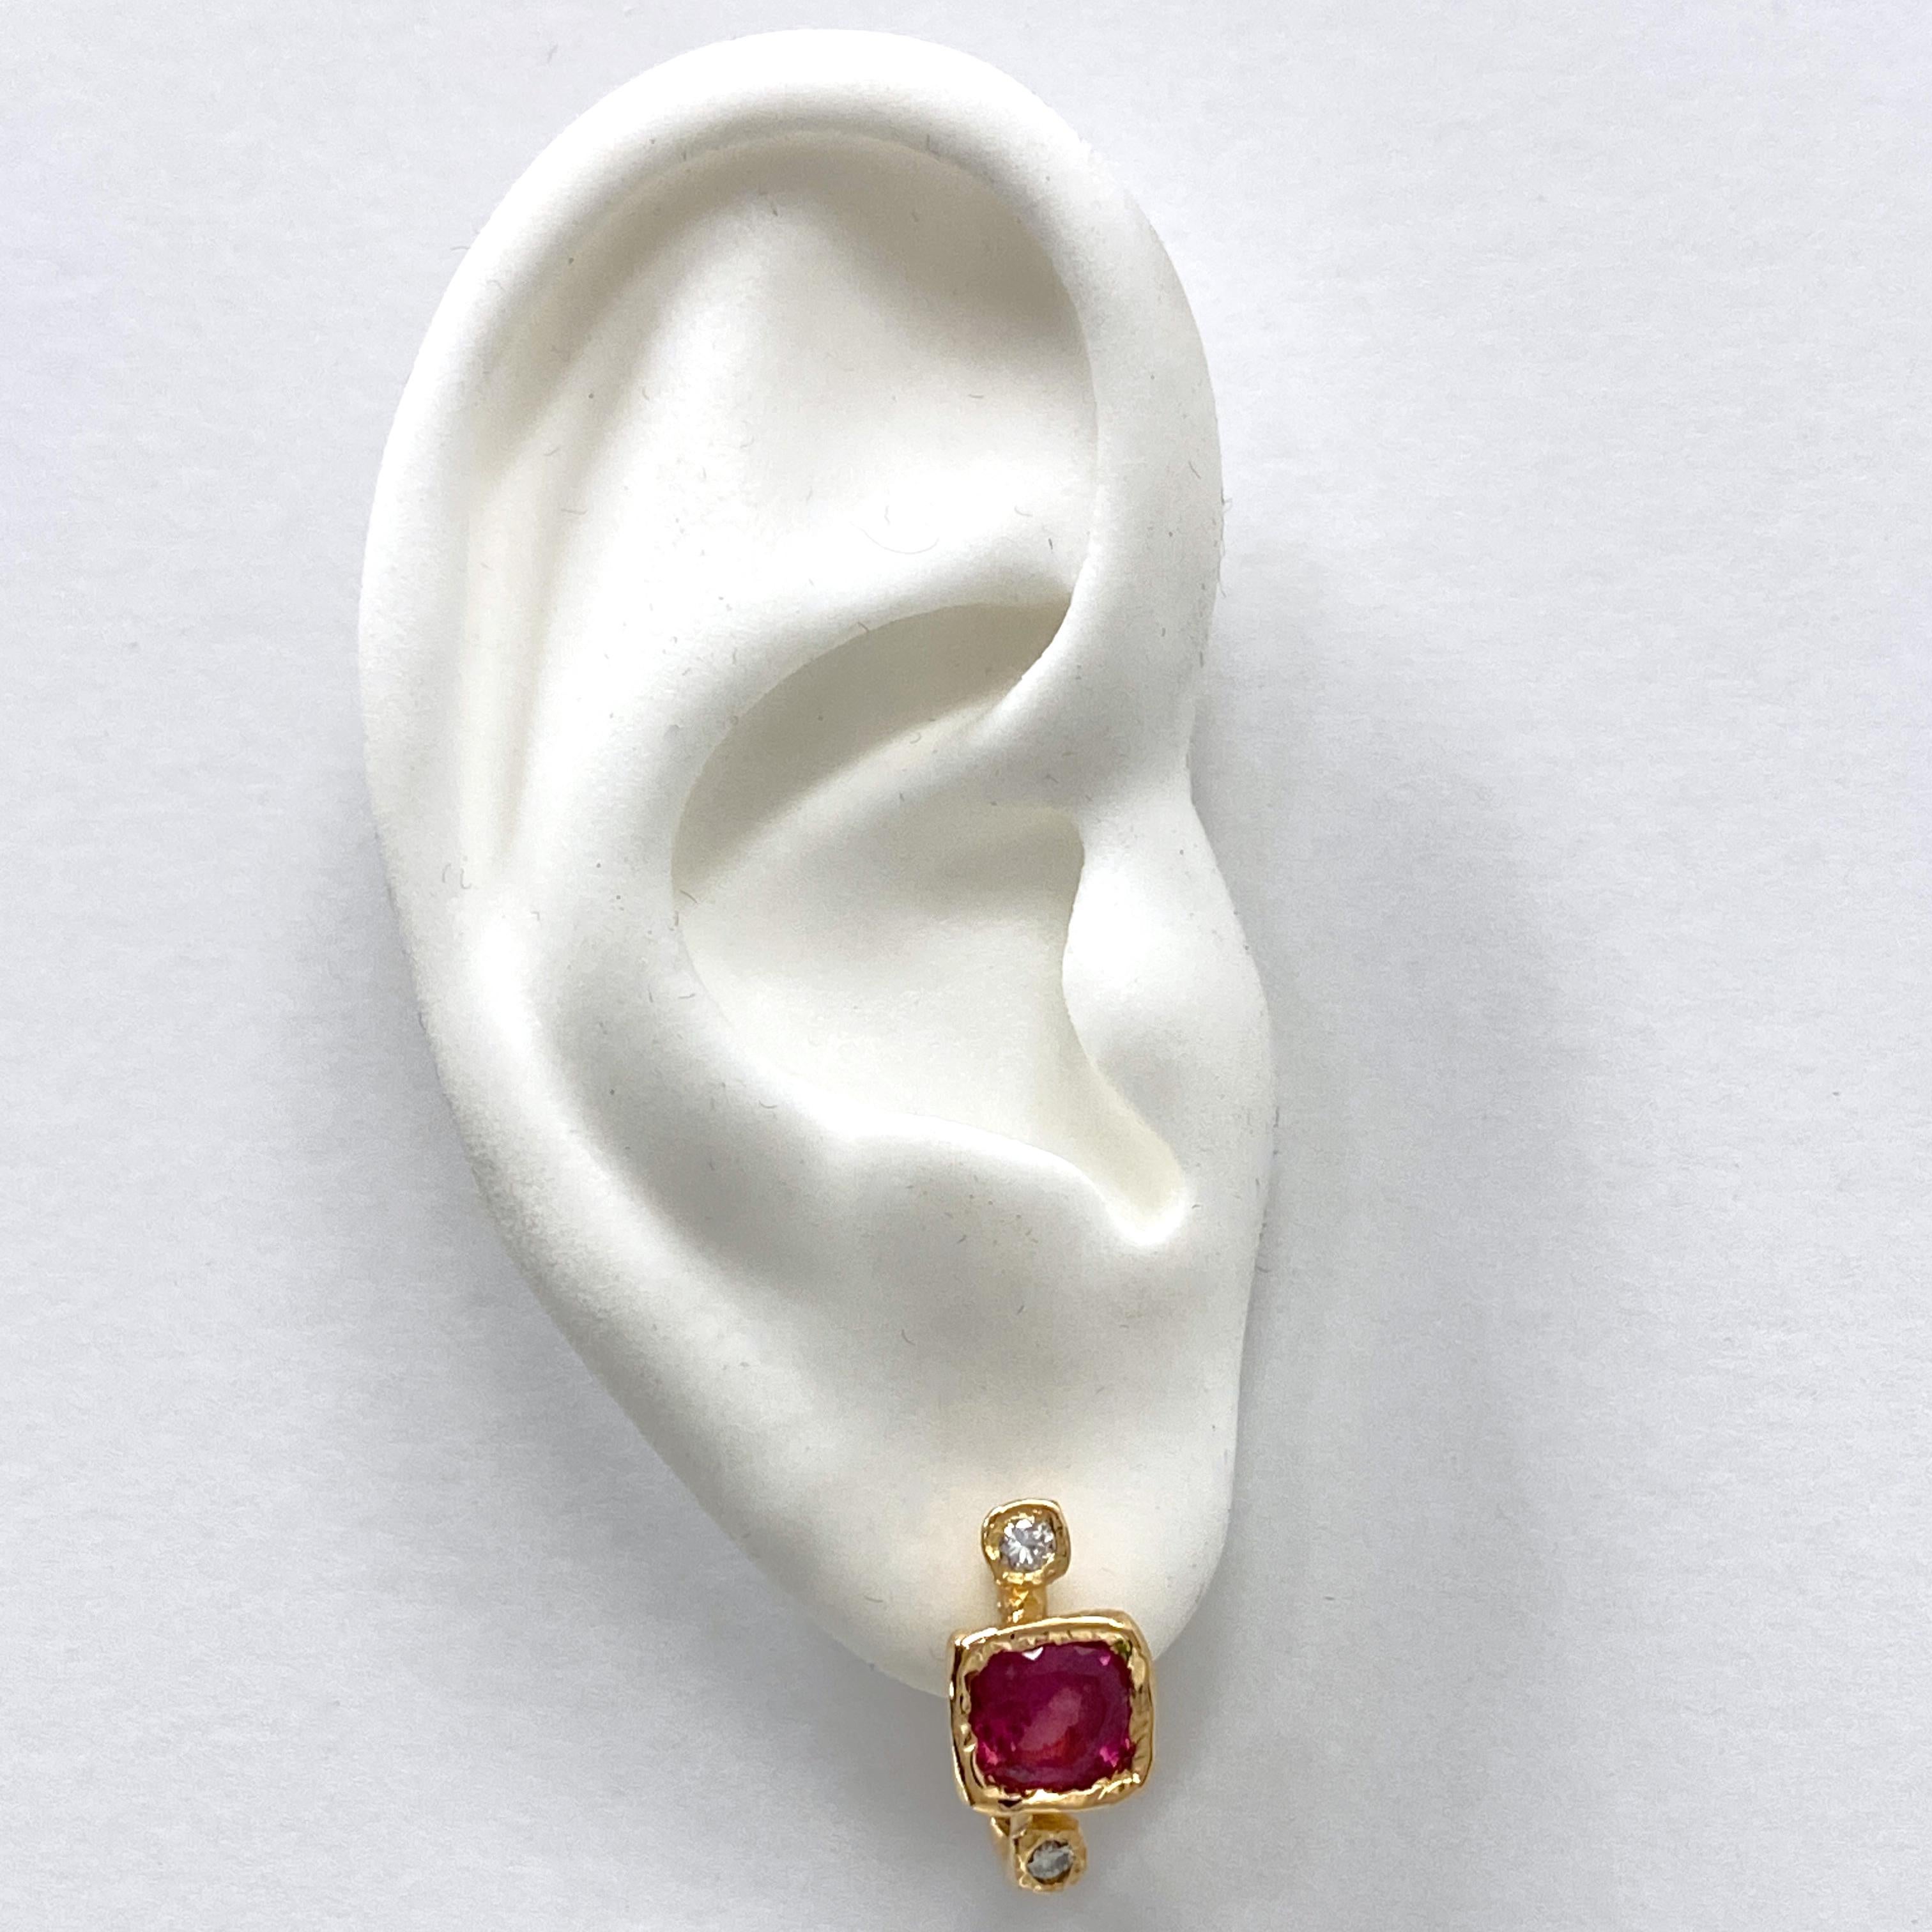 Brilliant Cut Pink Tourmaline Lever-Back Drop Earrings with Diamond Accents in 18K Yellow Gold